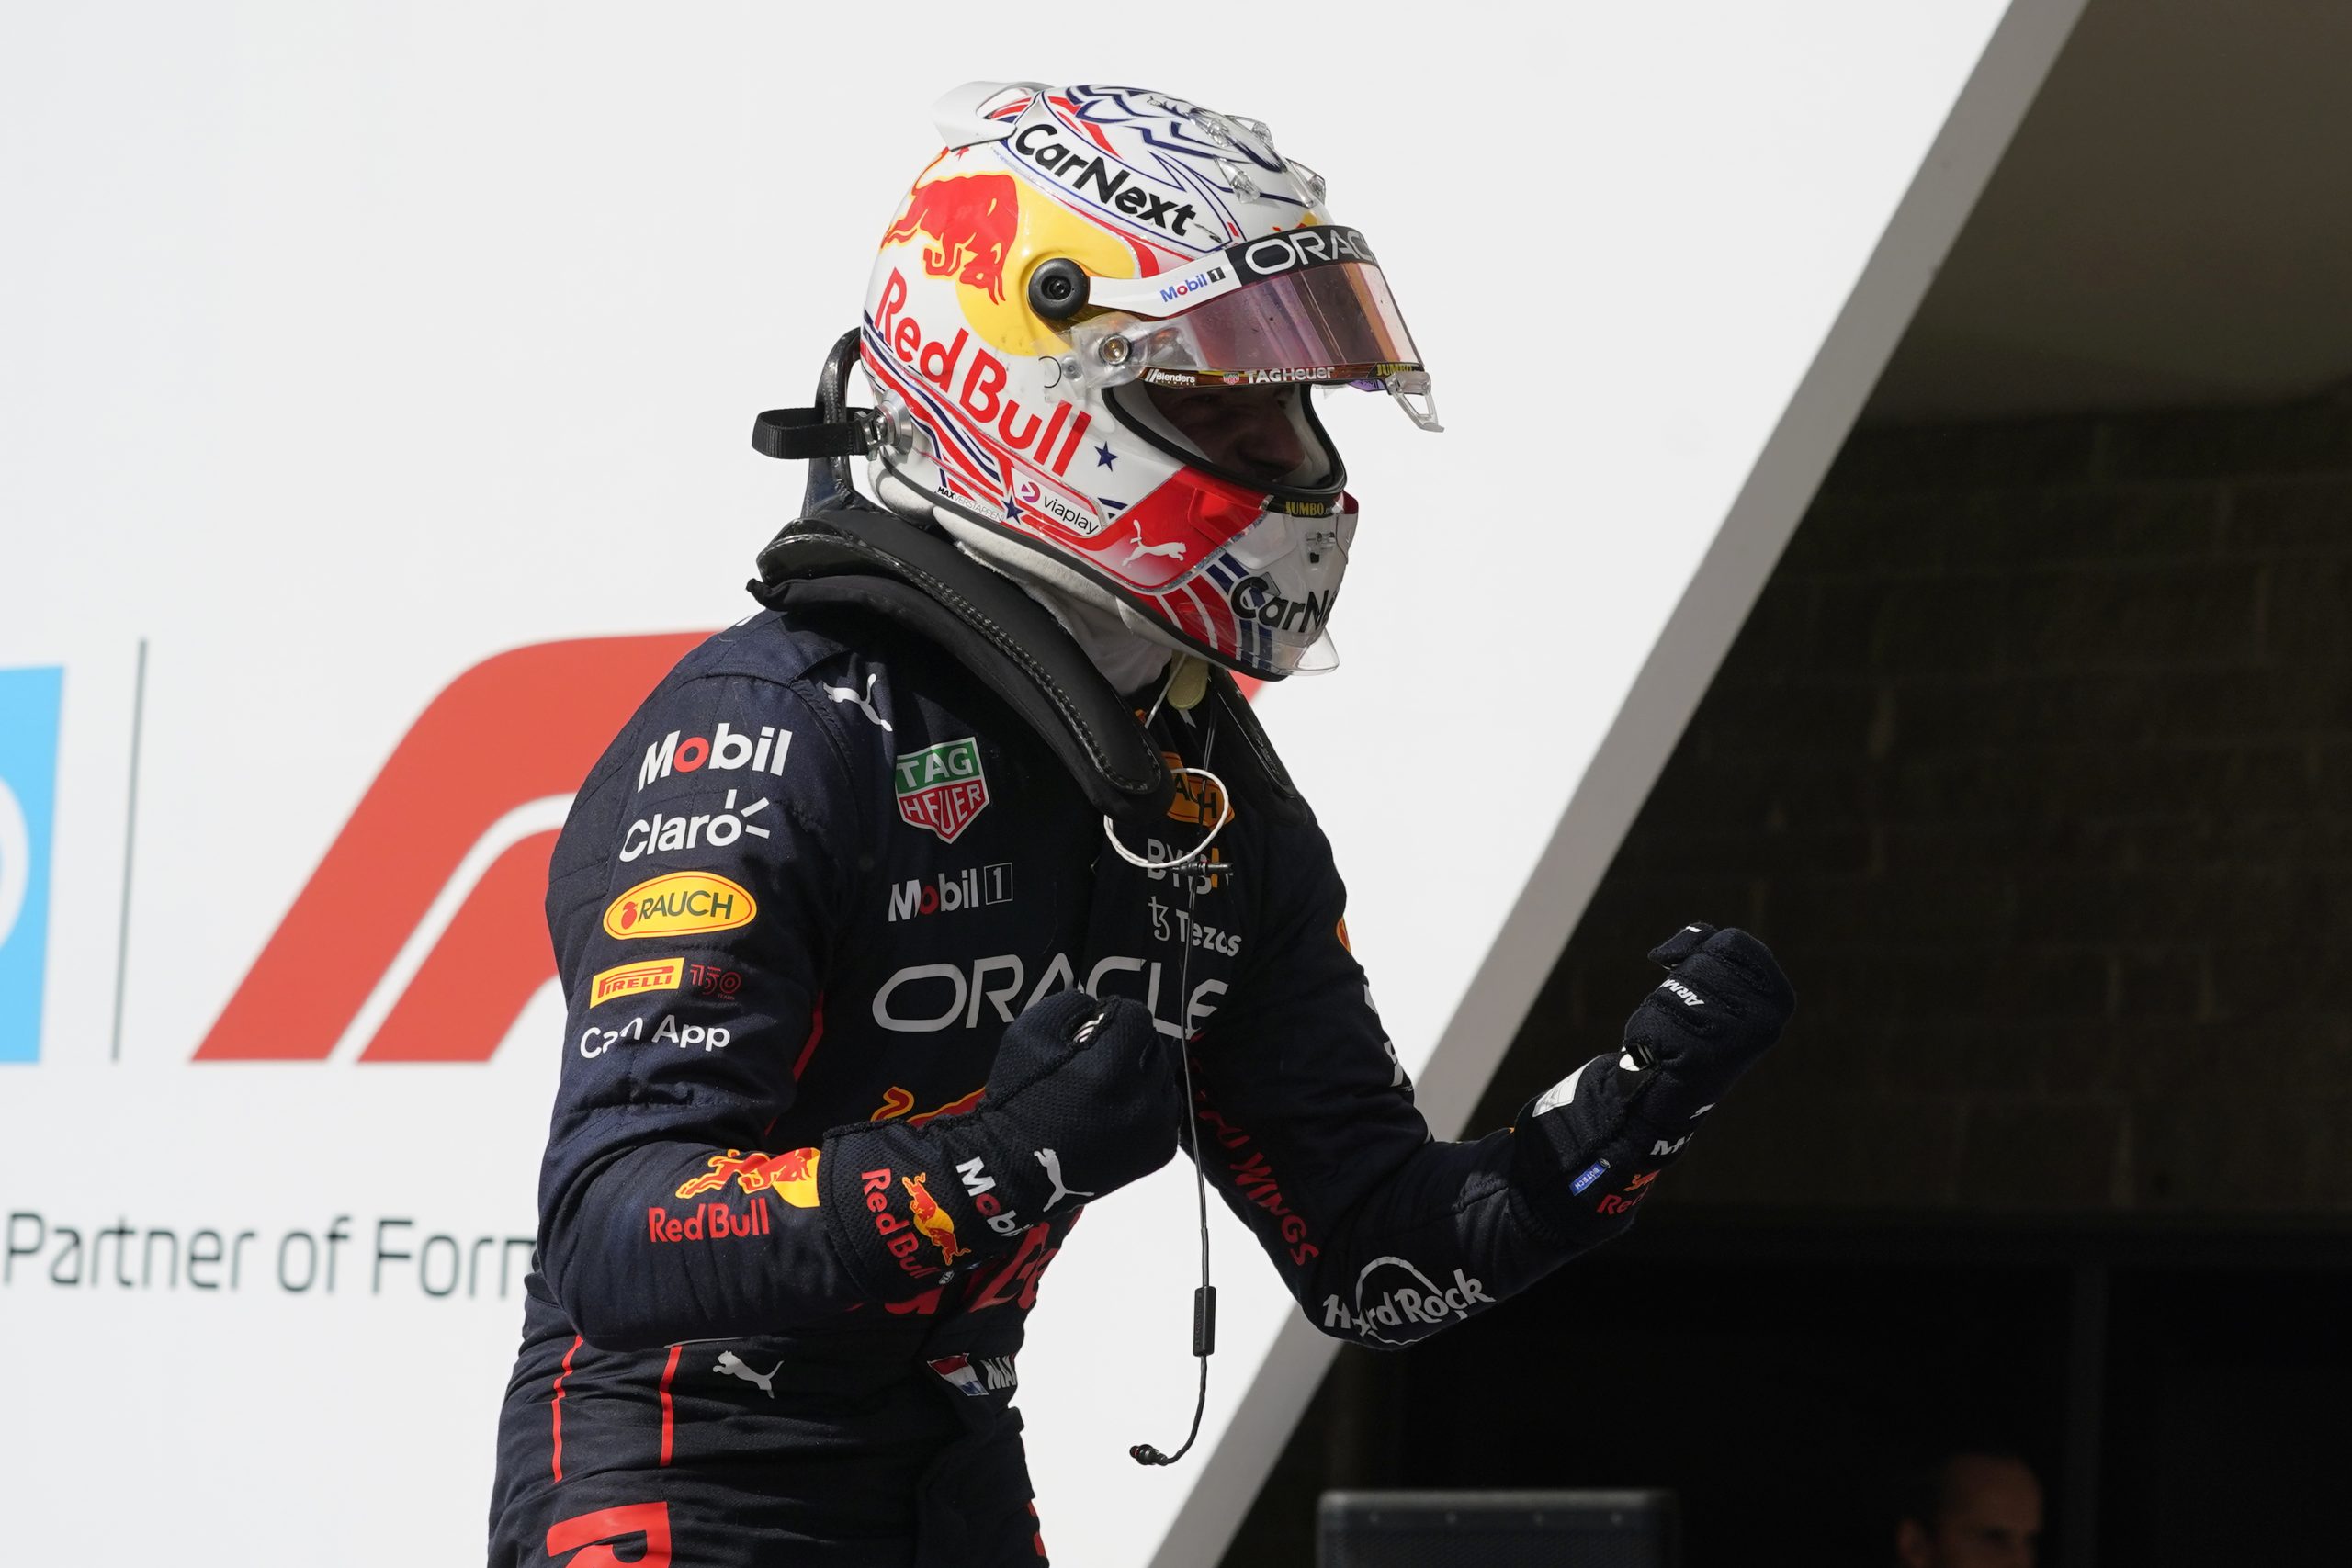 Data behind champion Max Verstappen’s season after he equals F1 race wins record